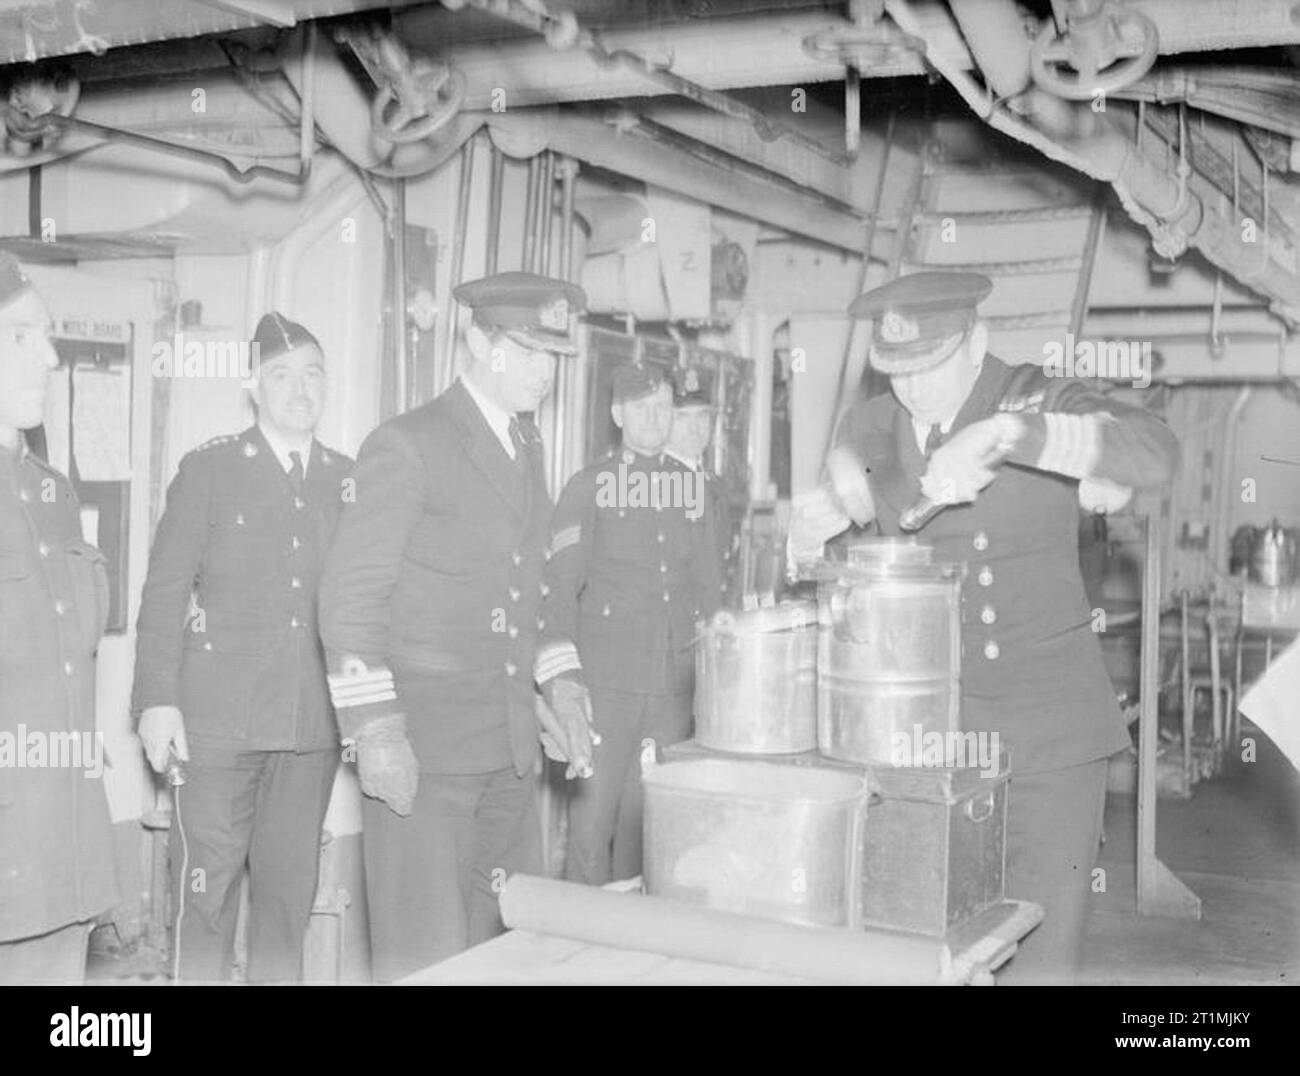 The Royal Marines. With the Royal Marines of the Home Fleet, October and November, 1942. 'Captain's rounds'. The Captain of the cruiser, HMS CUMBERLAND, inspecting mess traps on the Marines' messdeck, or 'barracks', as the Marines themselves prefer to call it. Even today the 'barracks' are generally situated between the officers' quarters and the seamens' messdecks, a quaint survival of the times when one of the chief duties of the Marines was to act as policemen and preserve discipline on board. Stock Photo